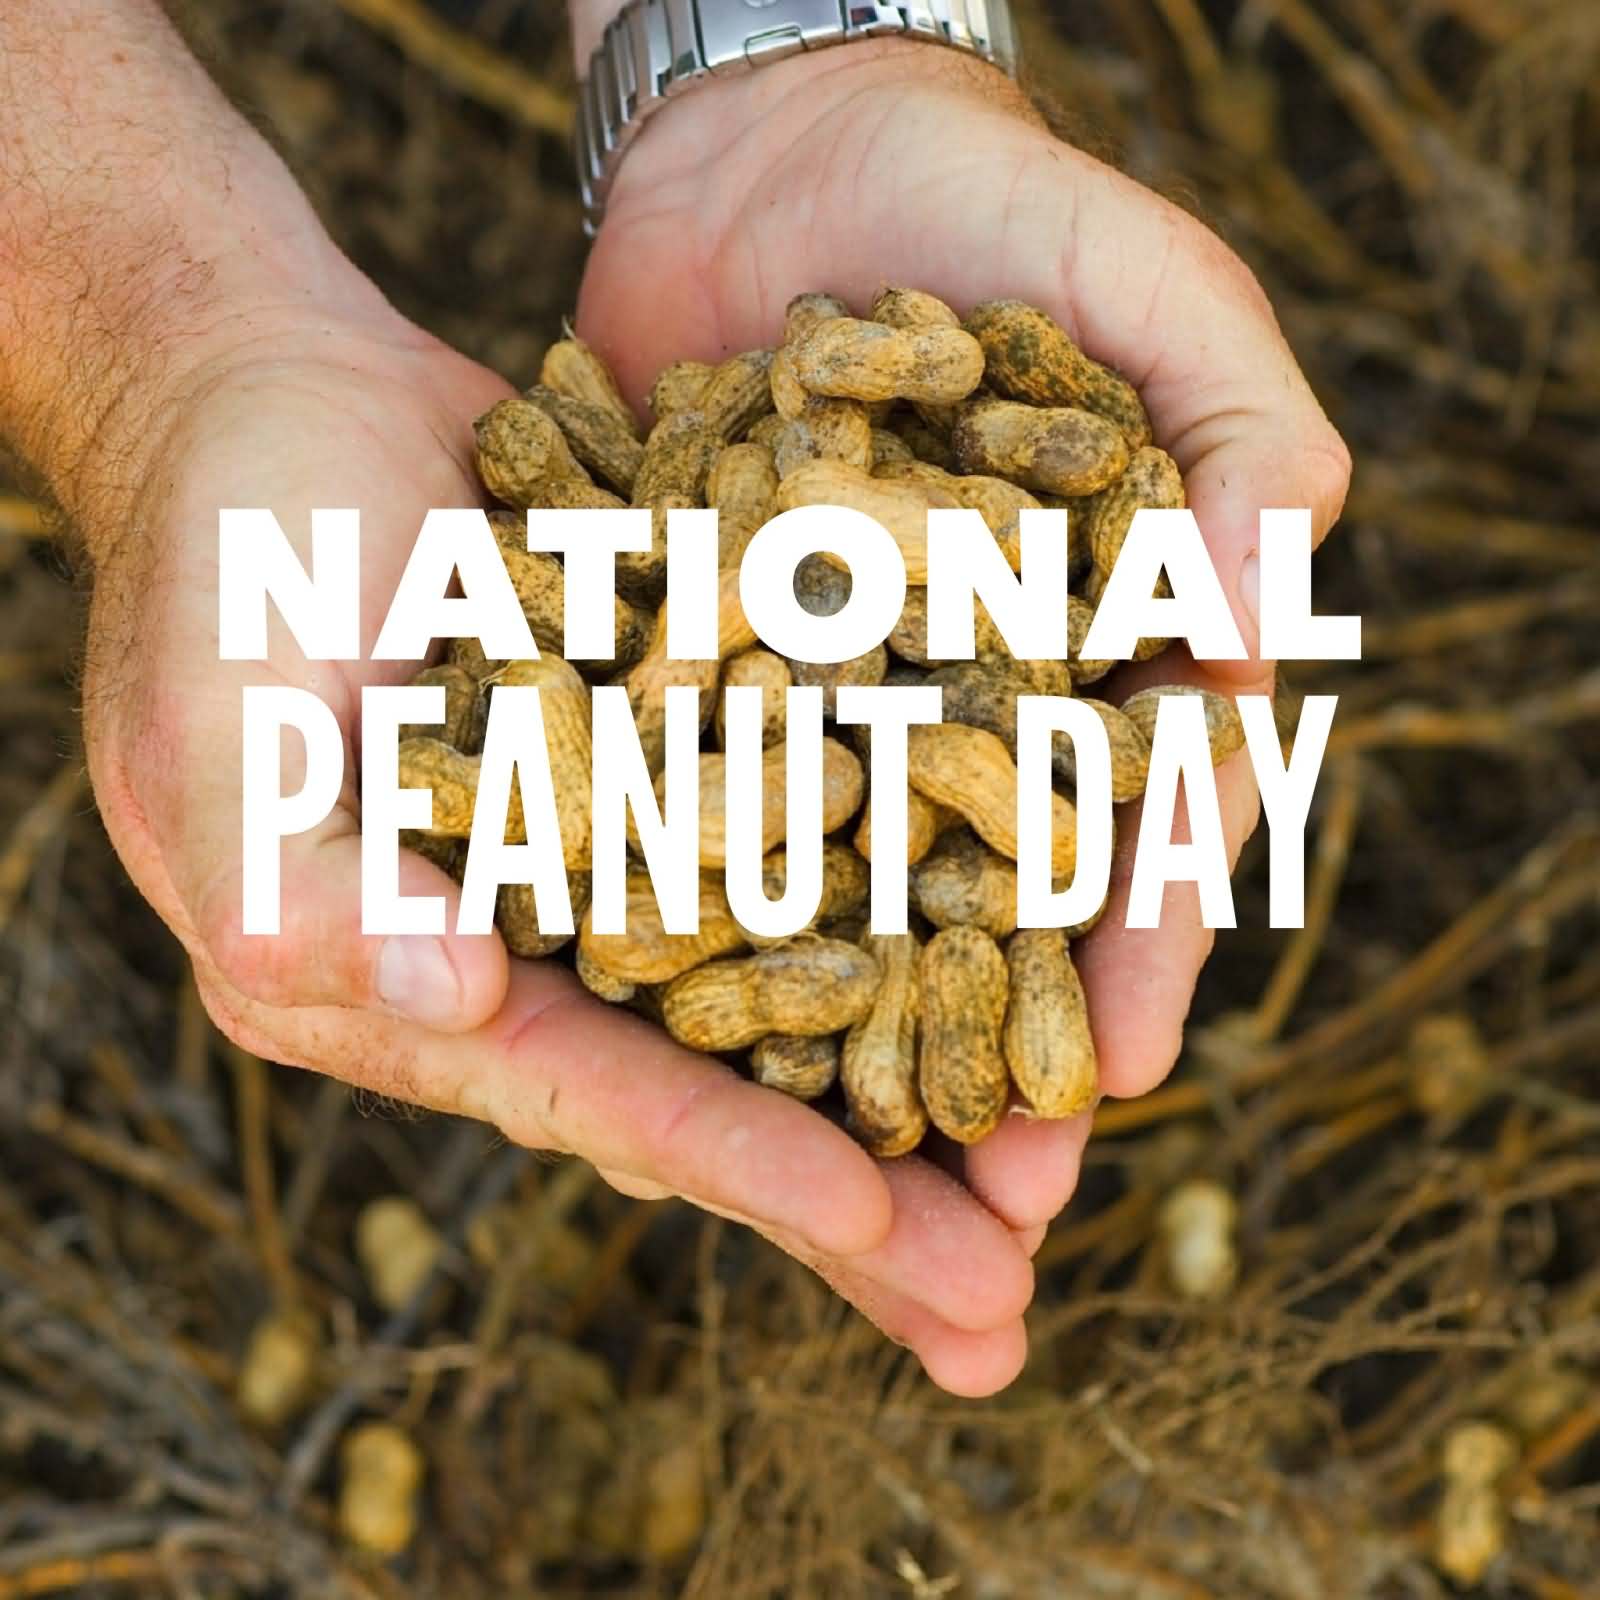 National Peanut Day Nuts In Hand